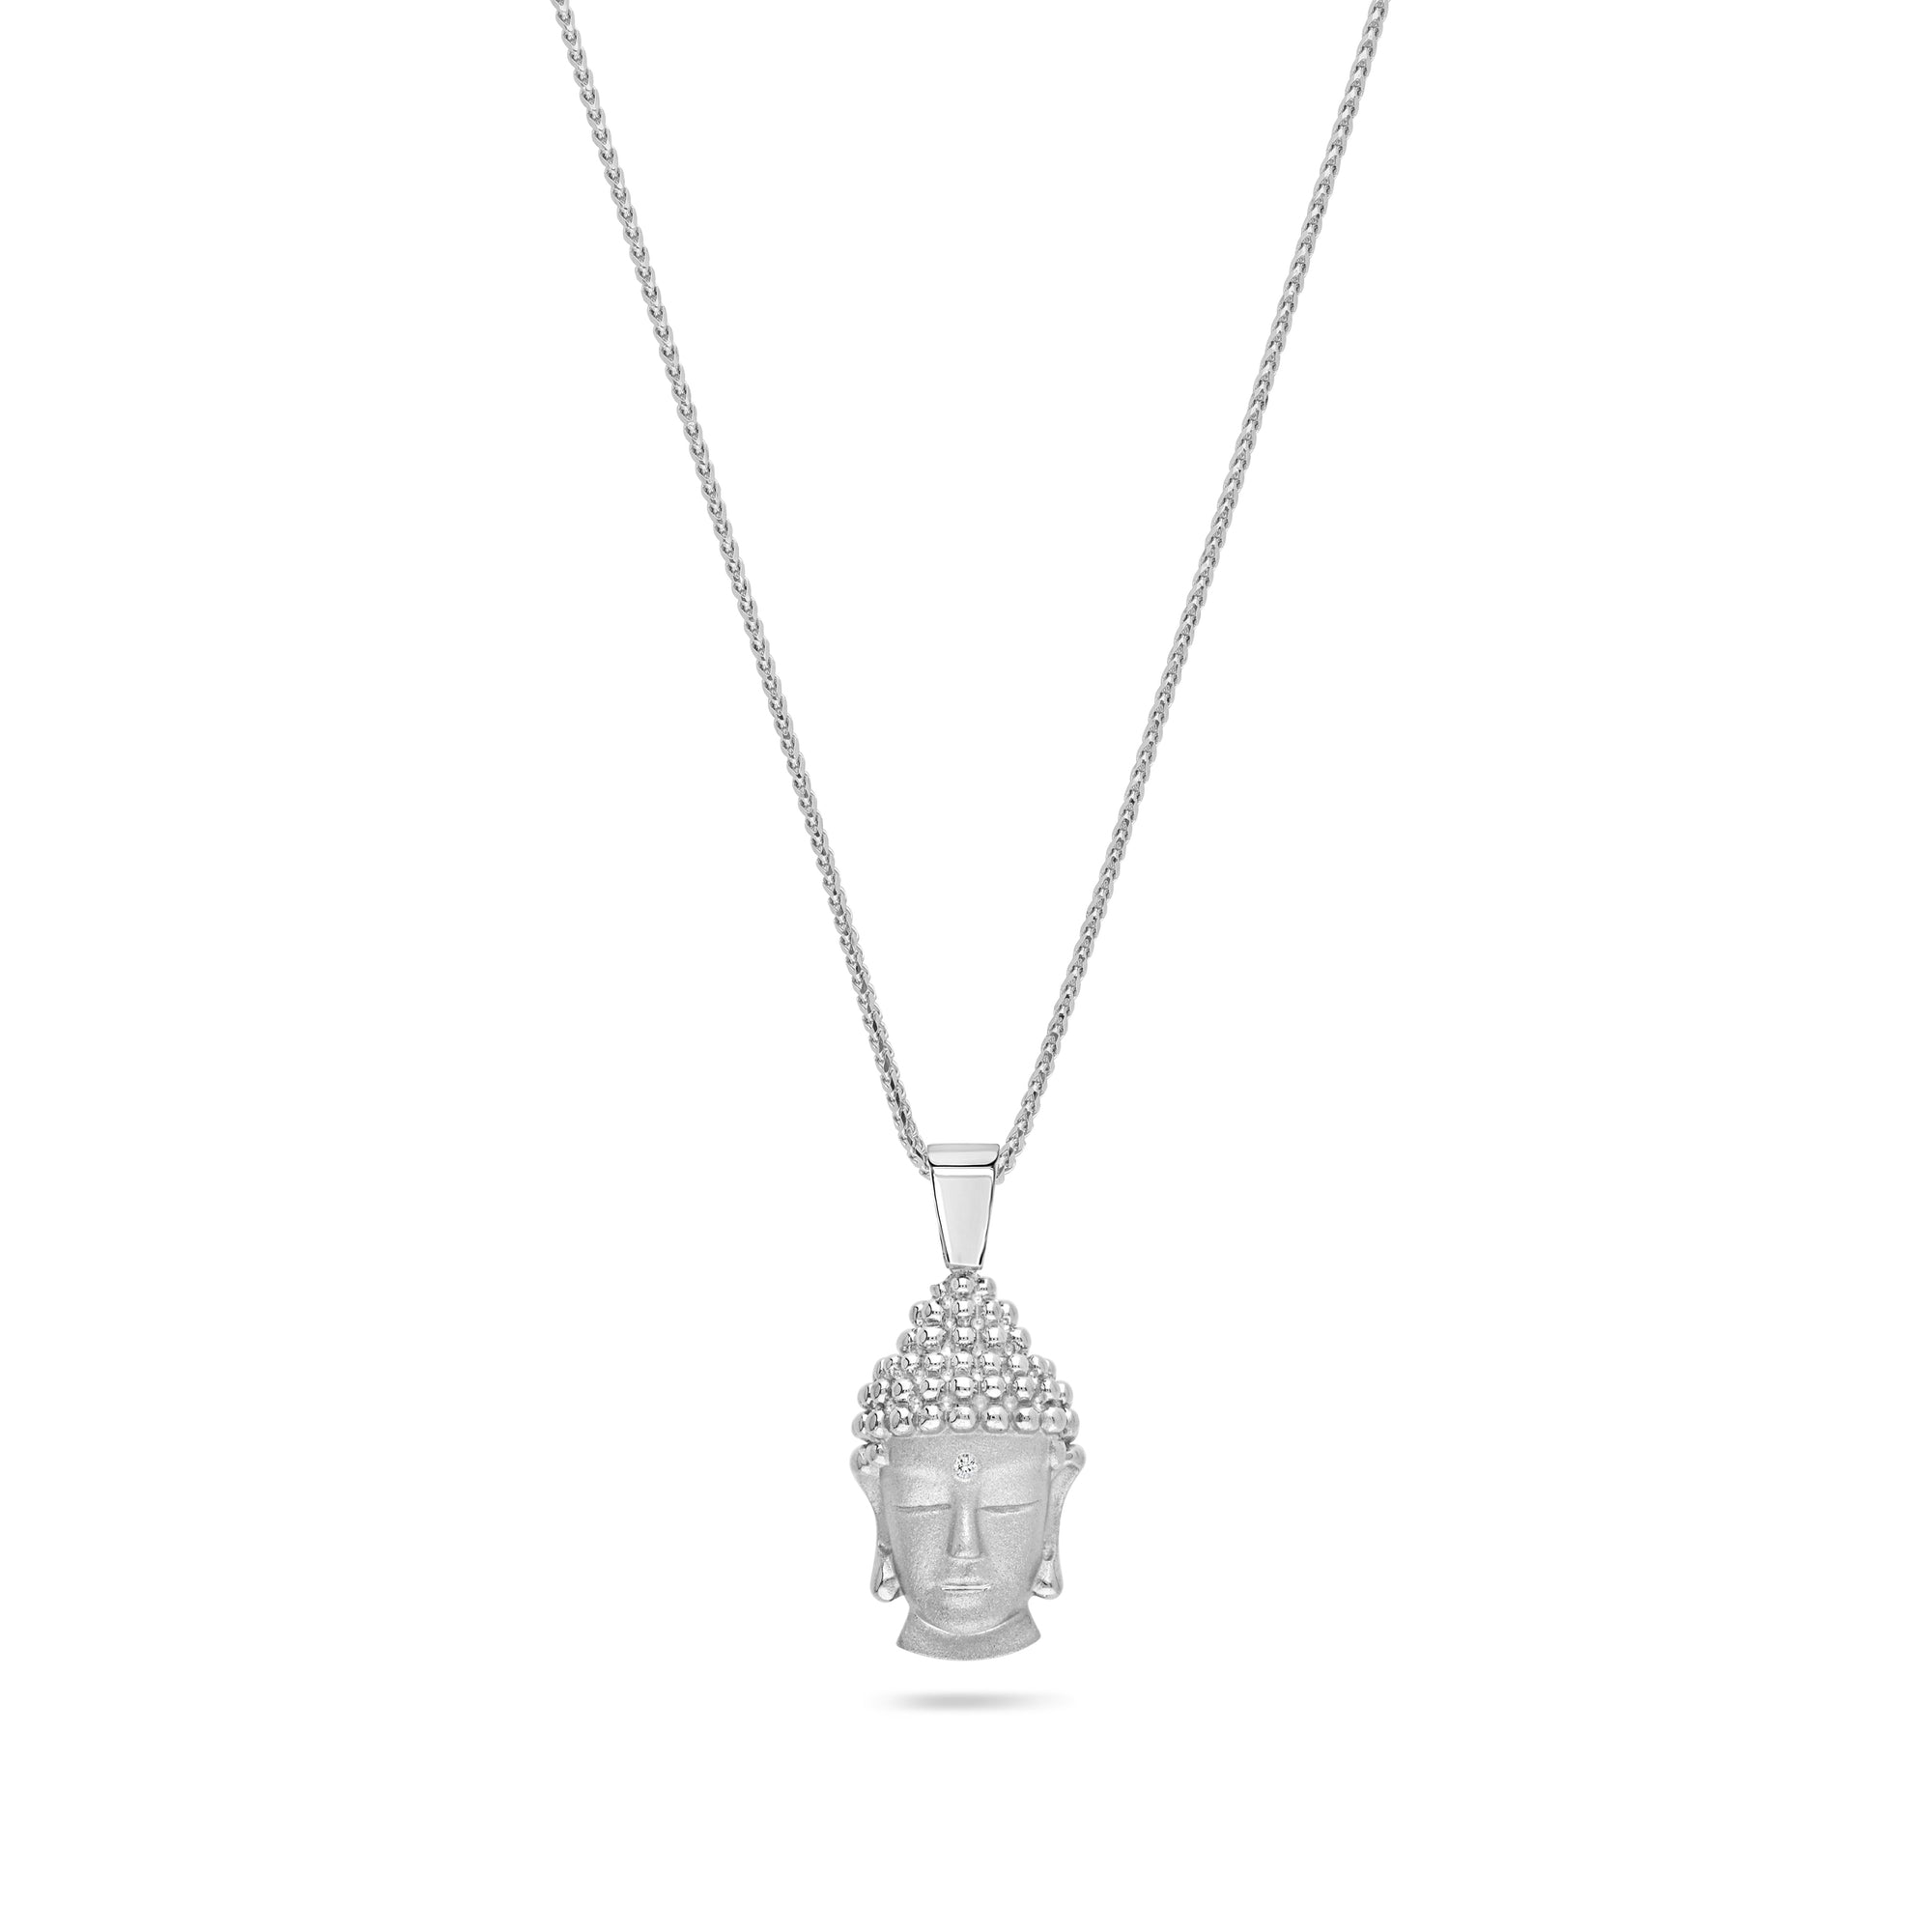 Silver .925 Buddha pendant or chain set! — AB and J